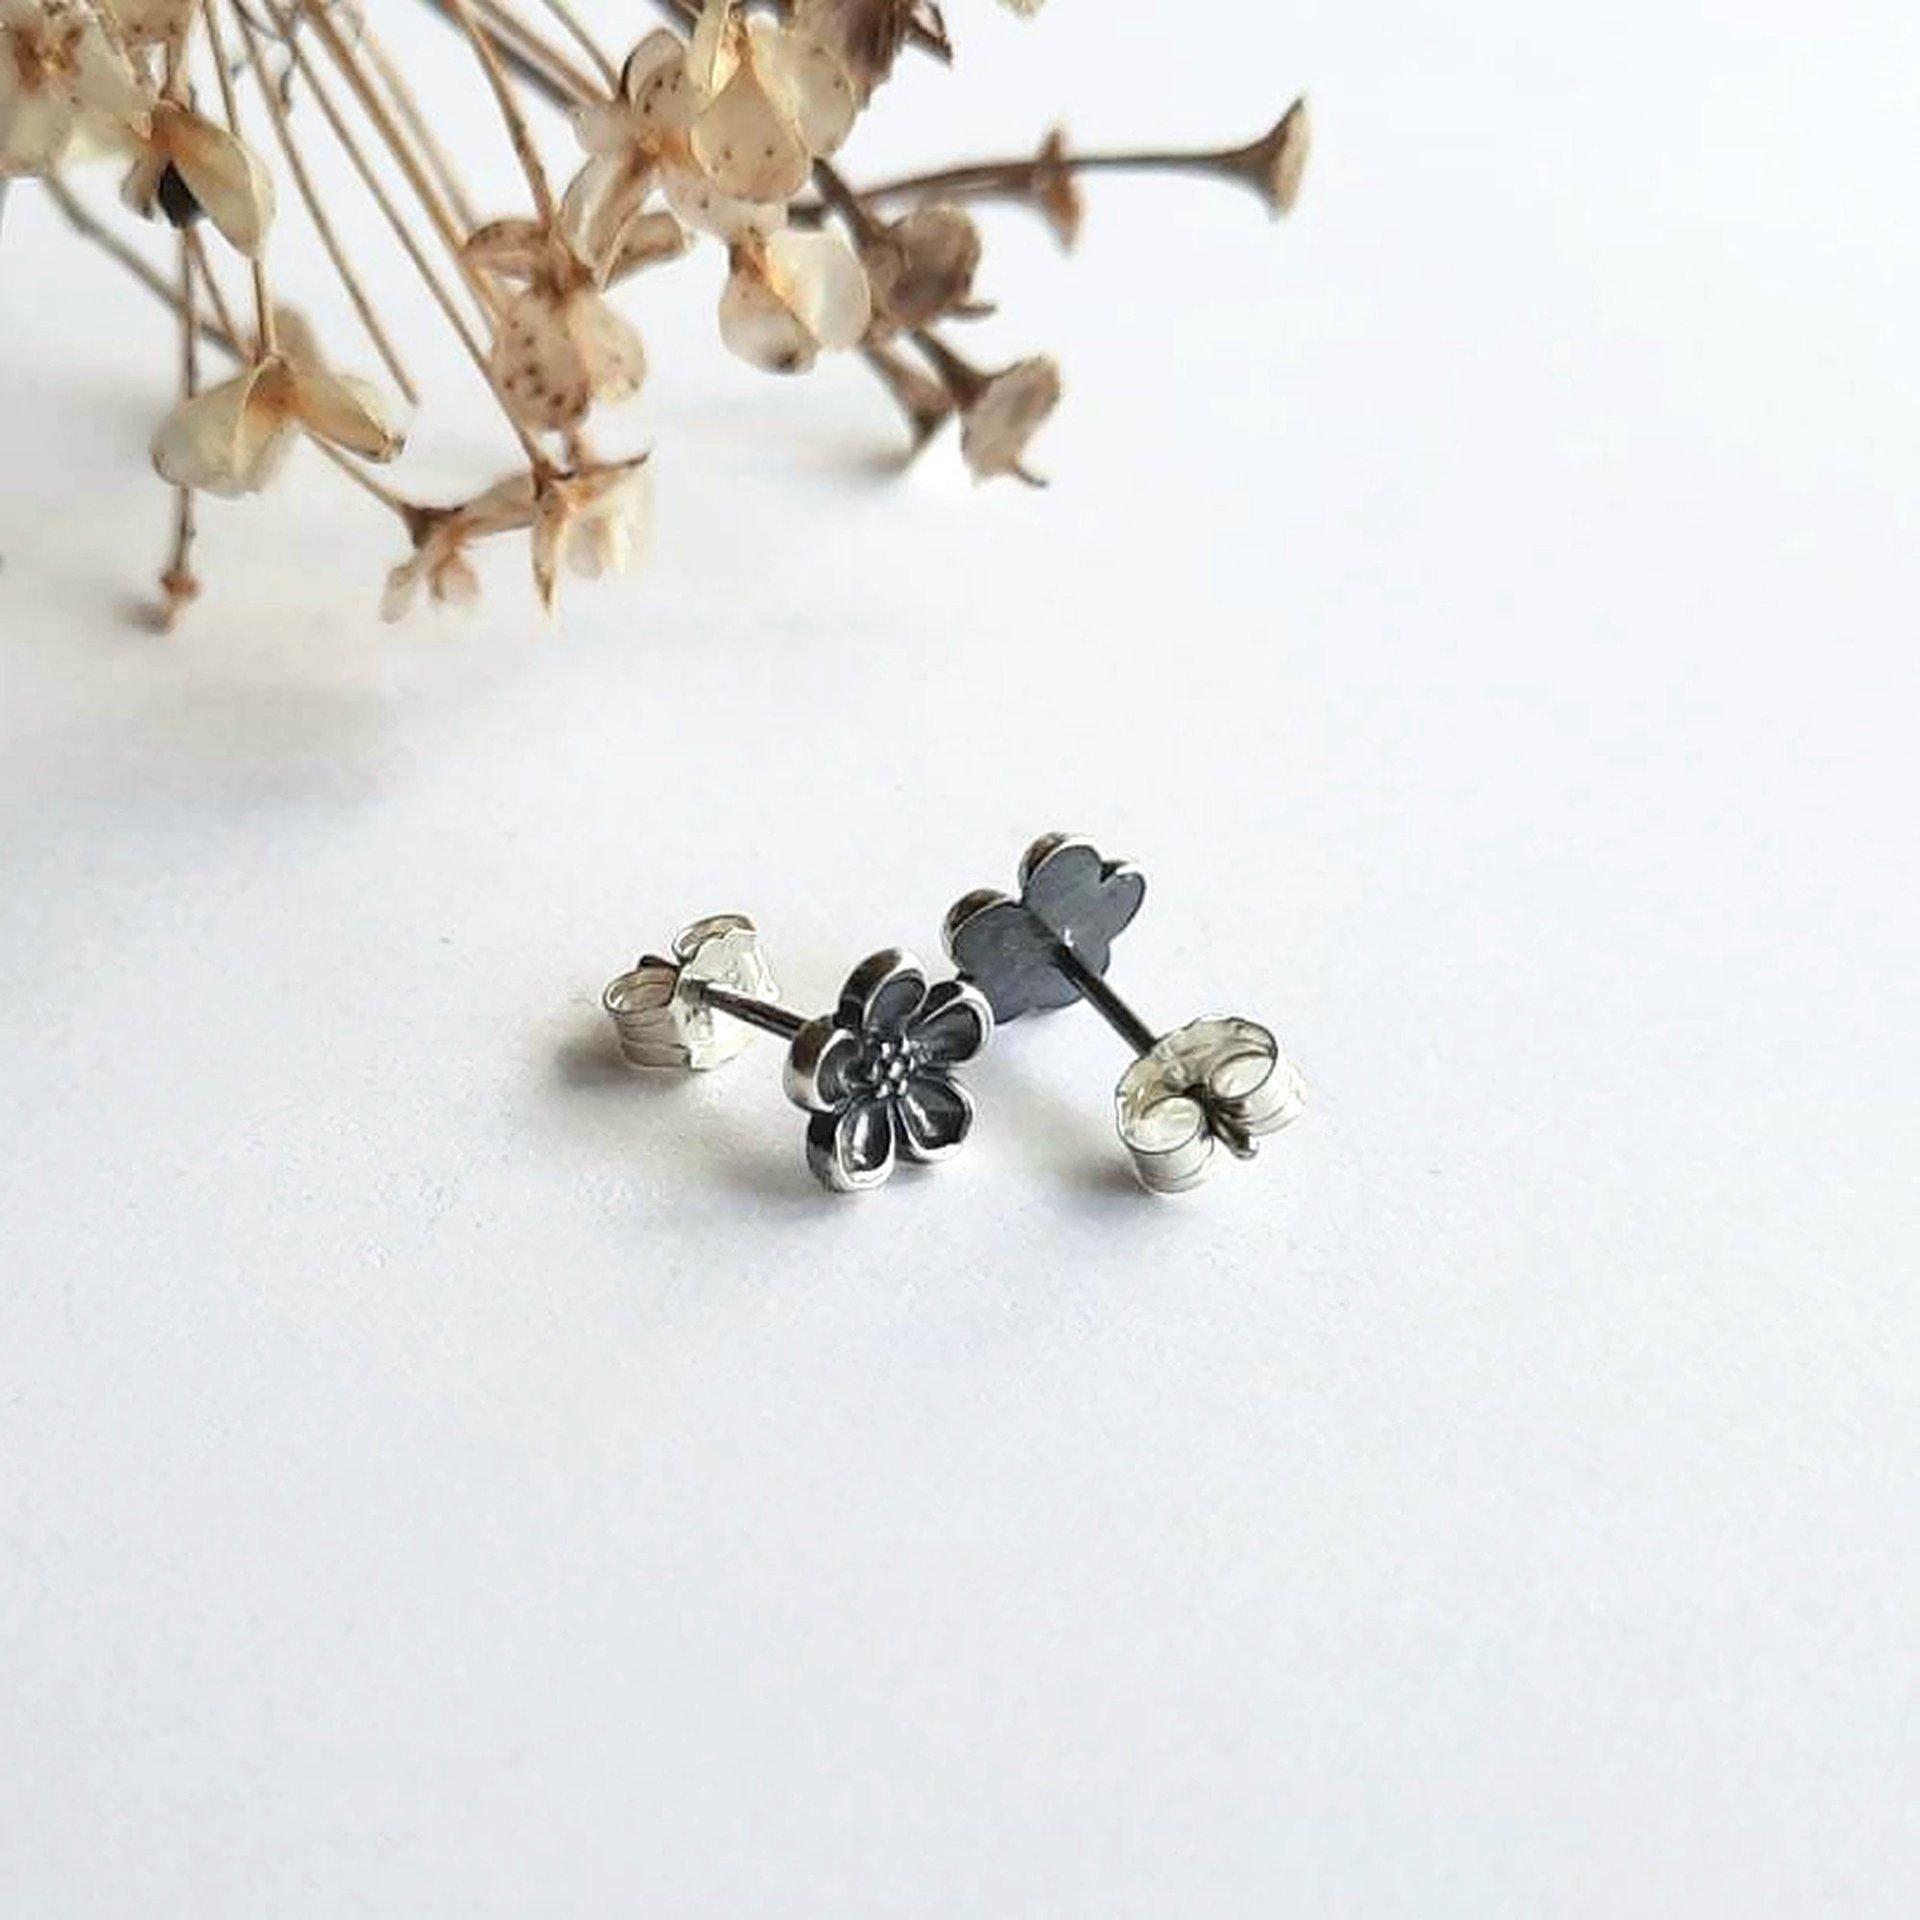 Oxidised Fine Silver Forget Me Not Stud Earrings ~ Handmade by The Tiny Tree Frog Jewellery